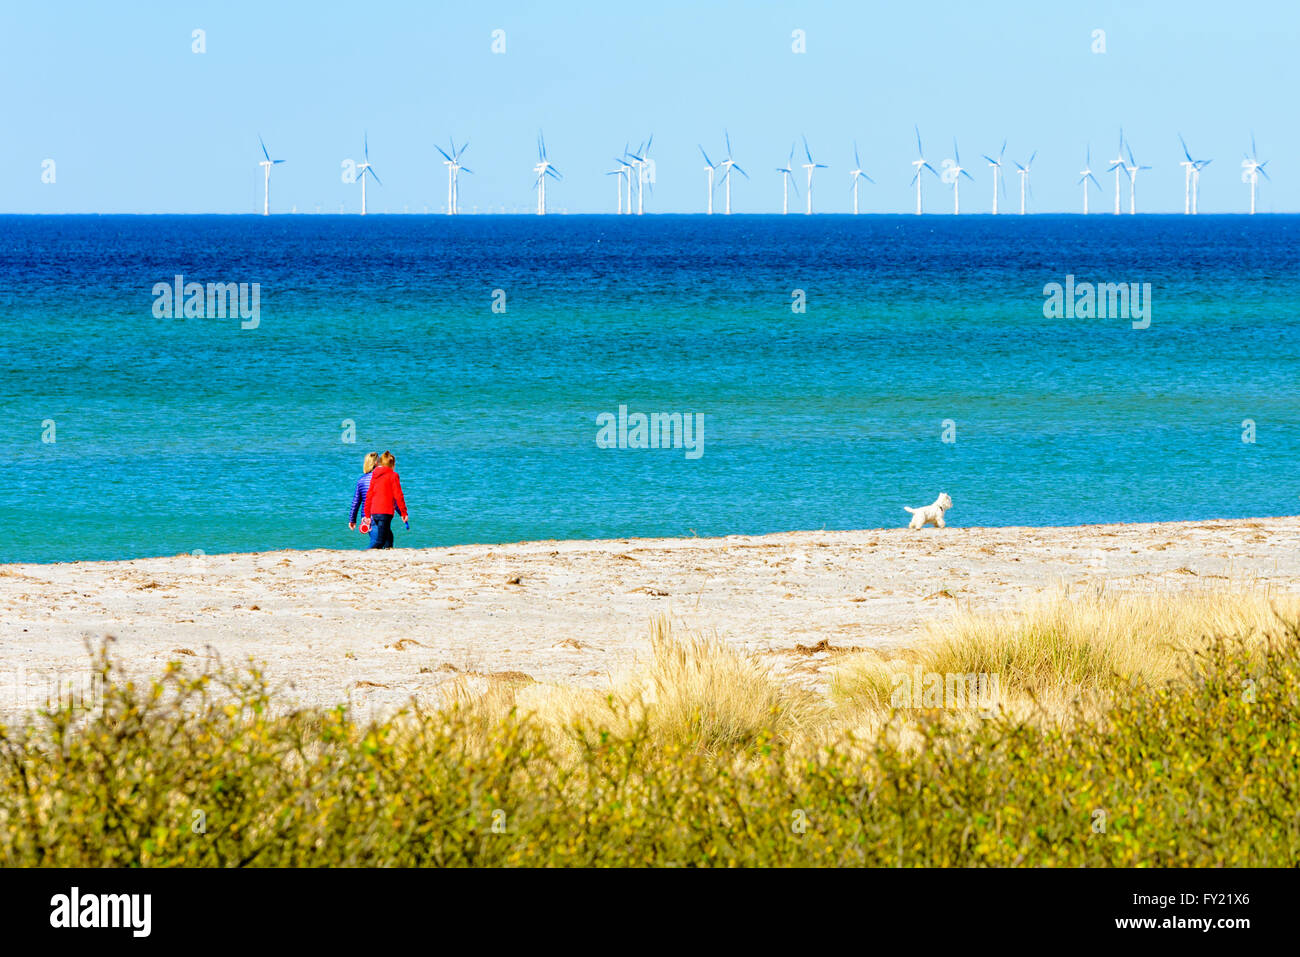 Skanor, Sweden - April 11, 2016: Two women walking a small and very cute dog on the sandy beach with open sea and wind farm or w Stock Photo